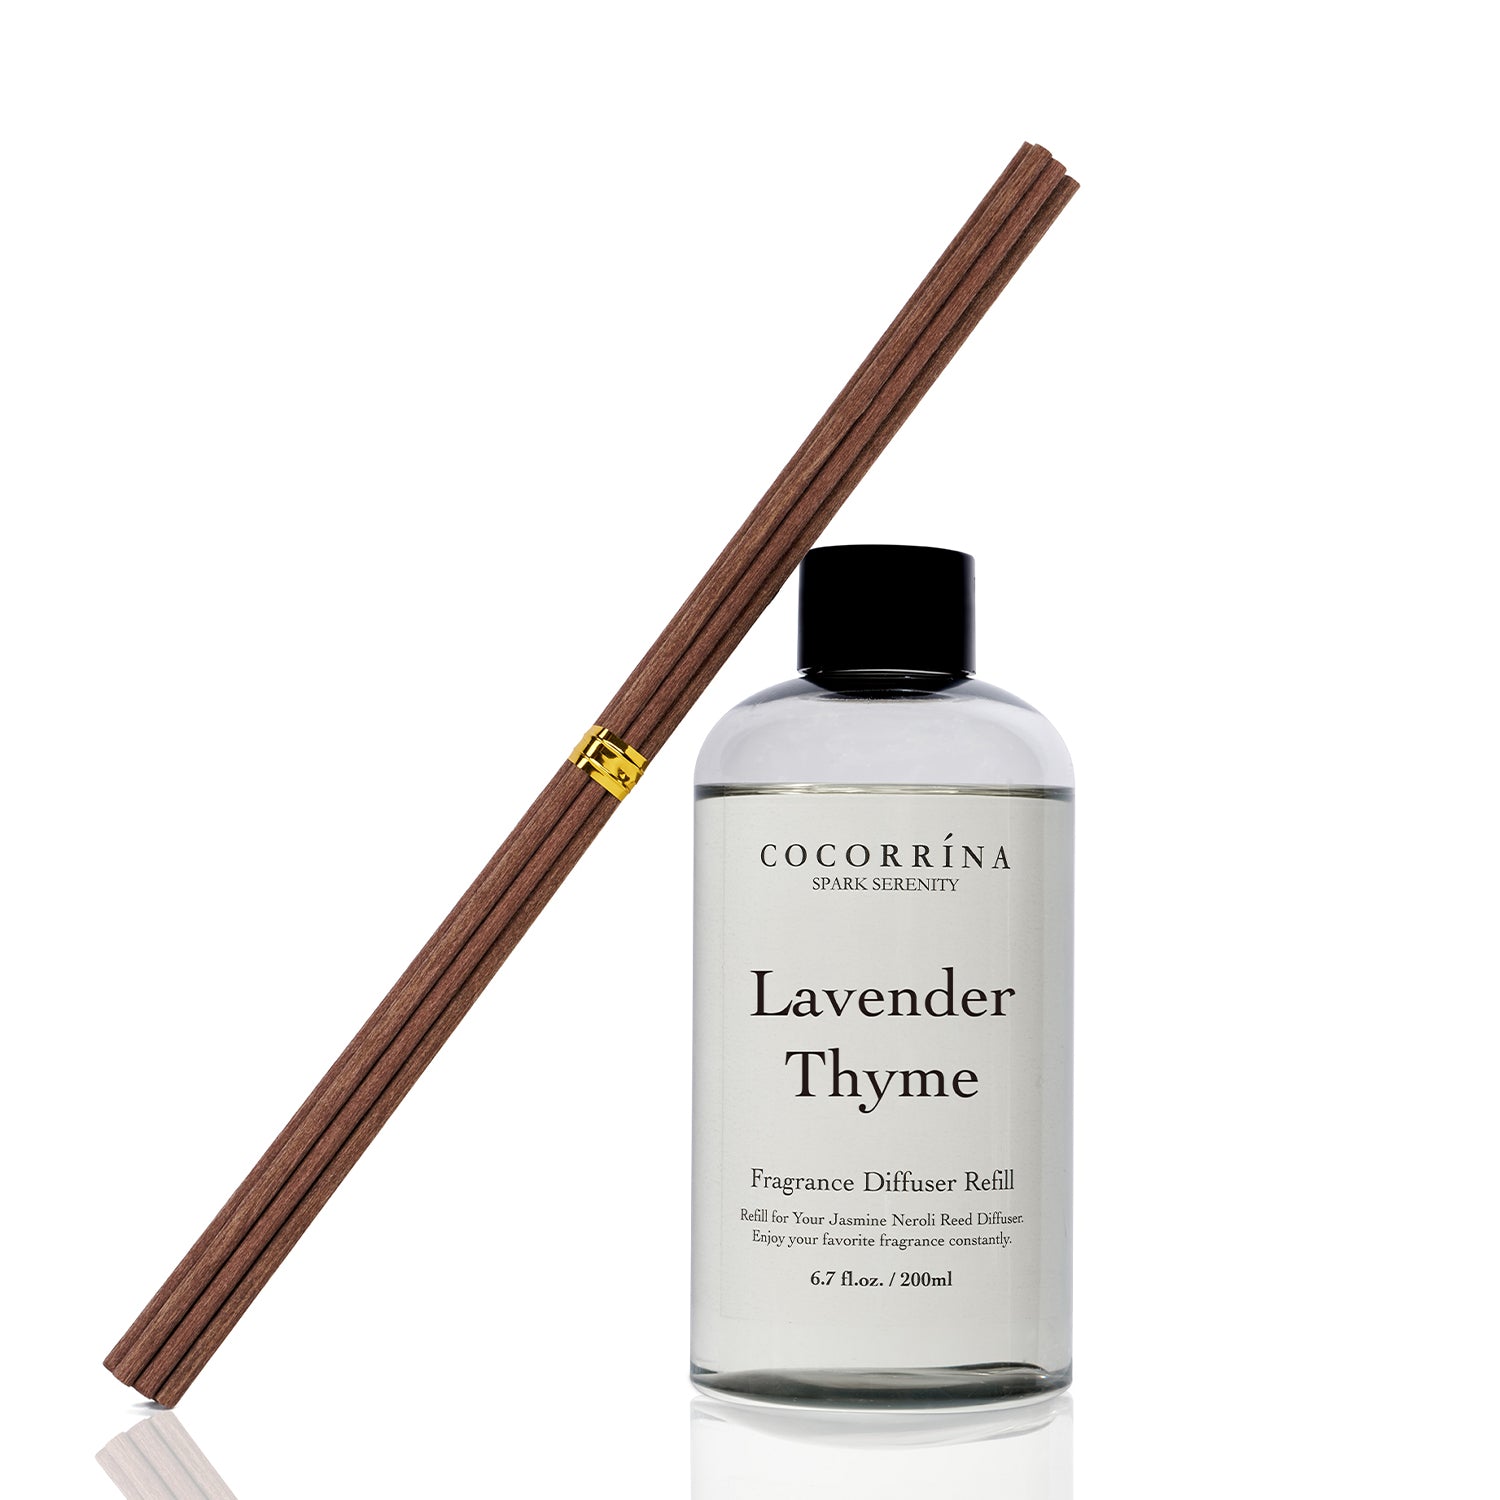 Cocorrína Lavender Thyme Scented Reed Diffuser Oil Refill with 8 Free Cotton Reed Sticks, Home Fragrance for Bedroom, Bathroom, Oil Diffuser Home